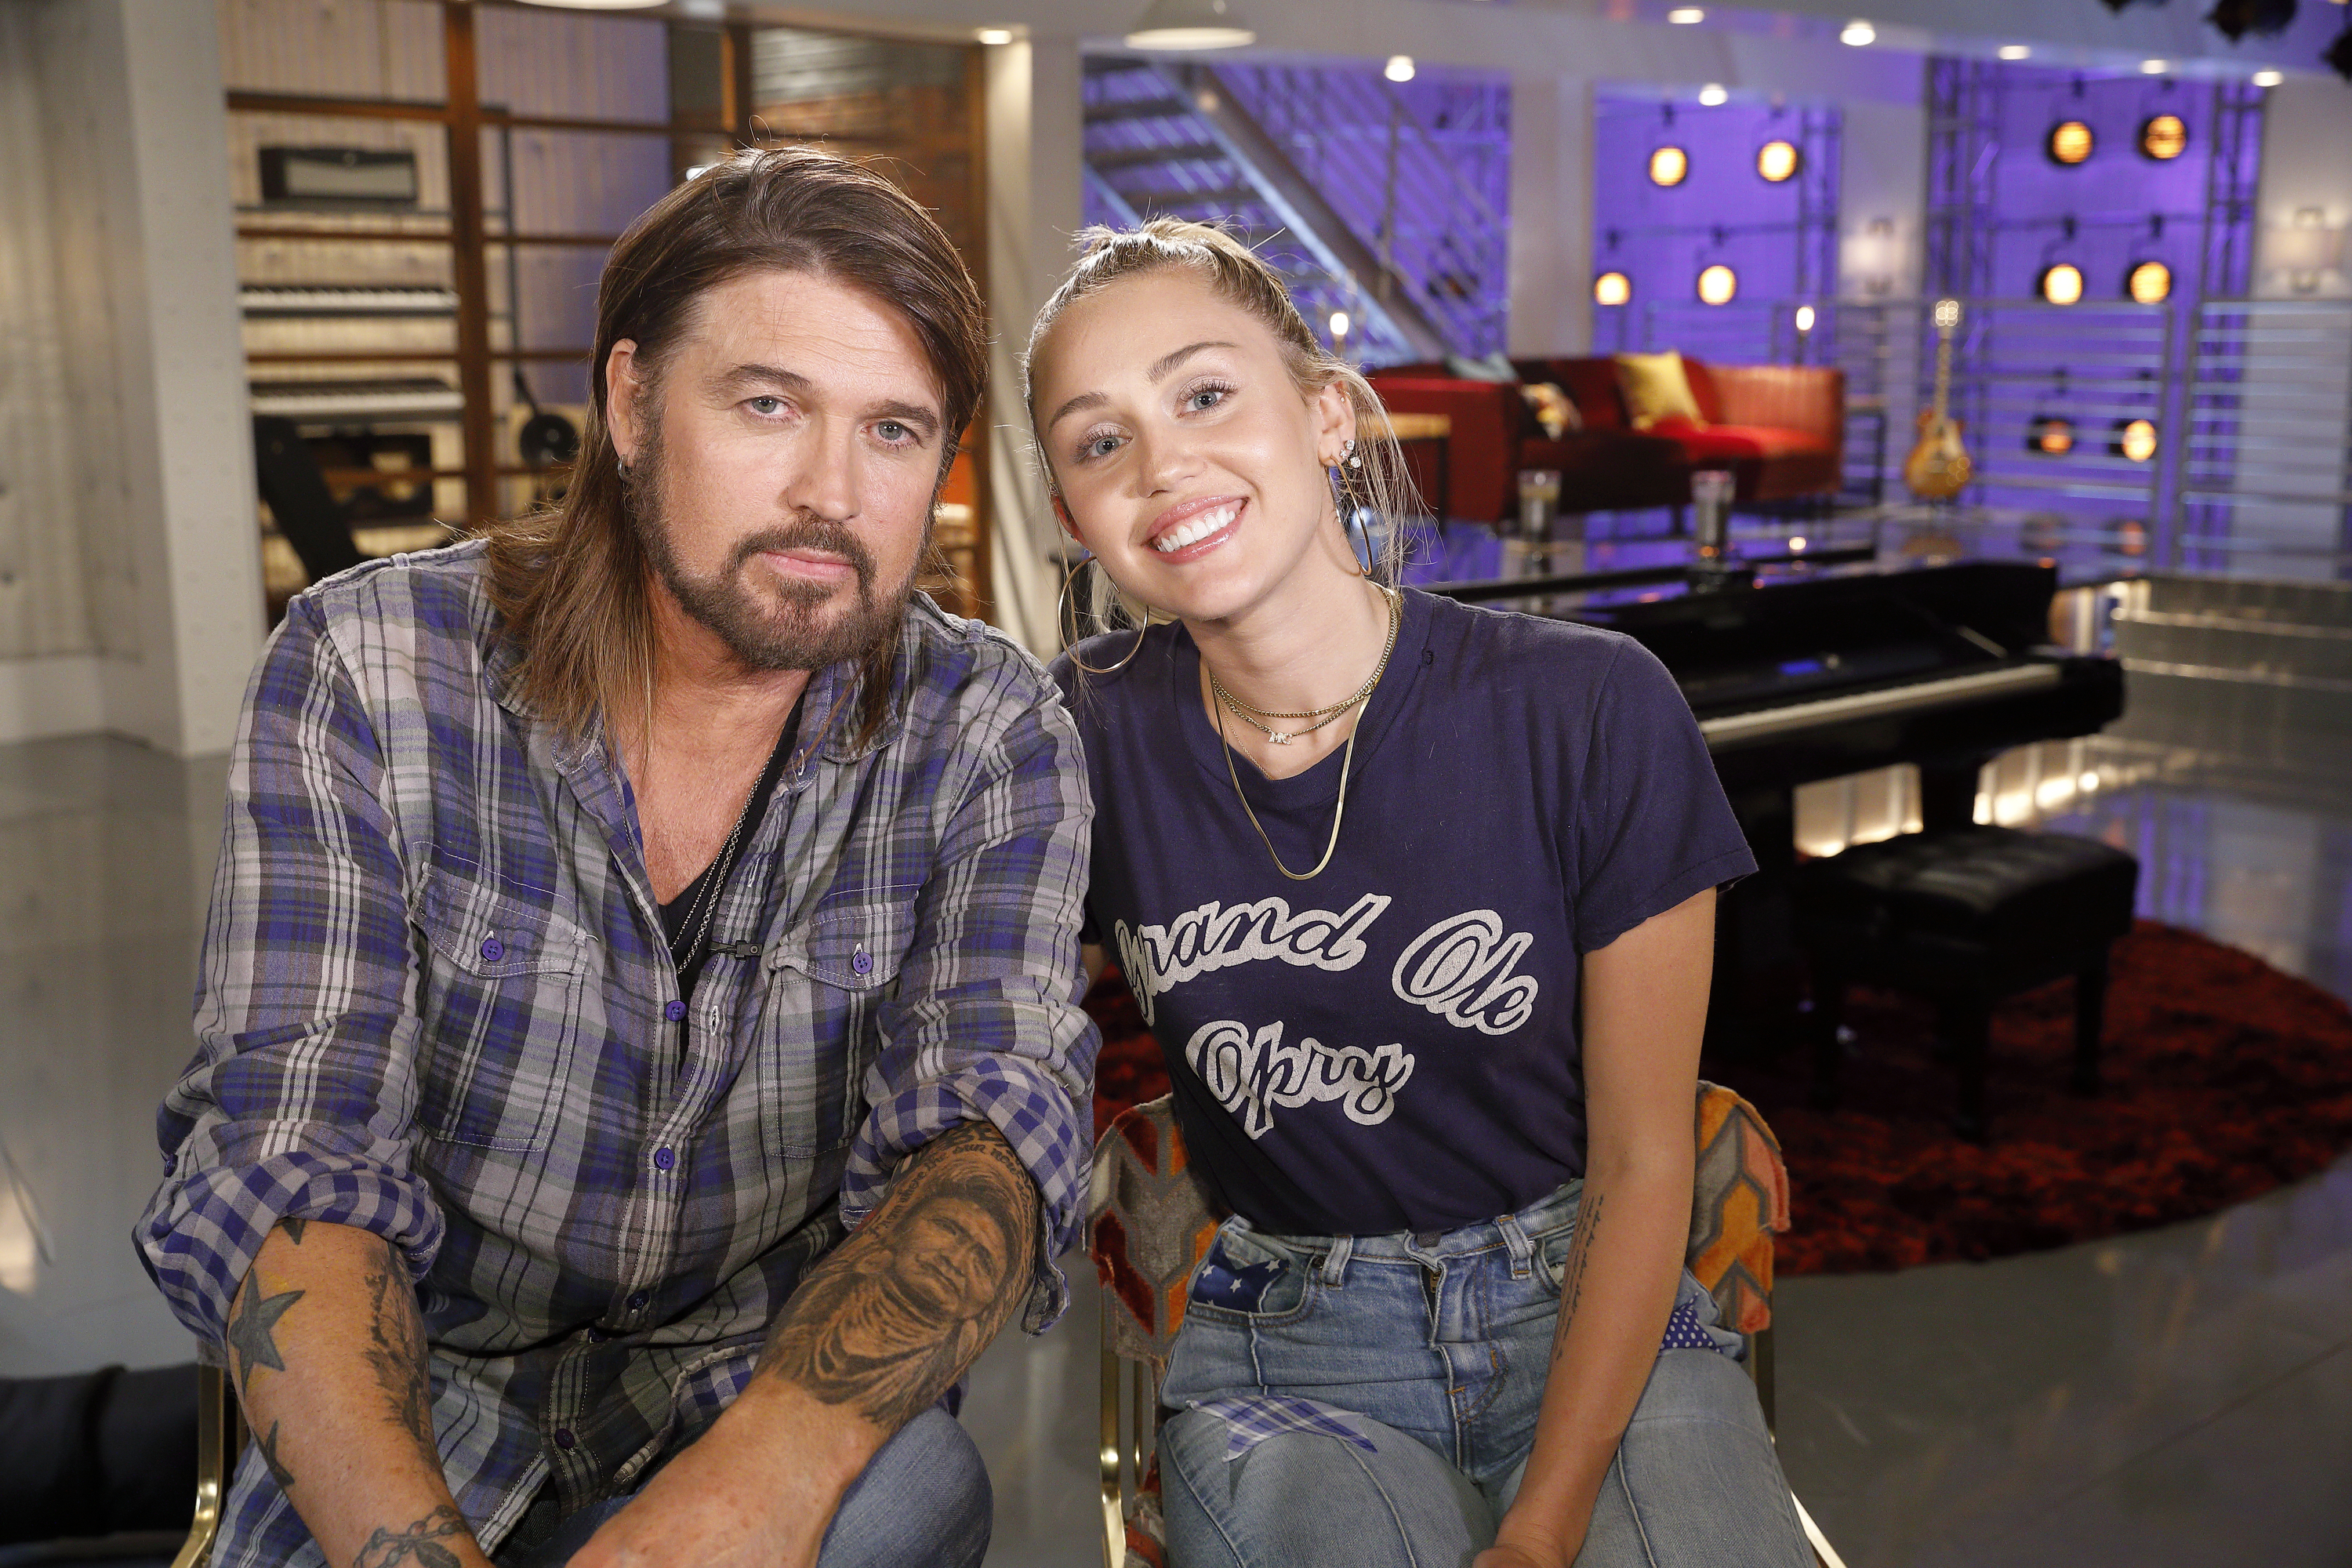 Billy Ray Cyrus and Miley Cyrus sitting together, smiling in a studio setting